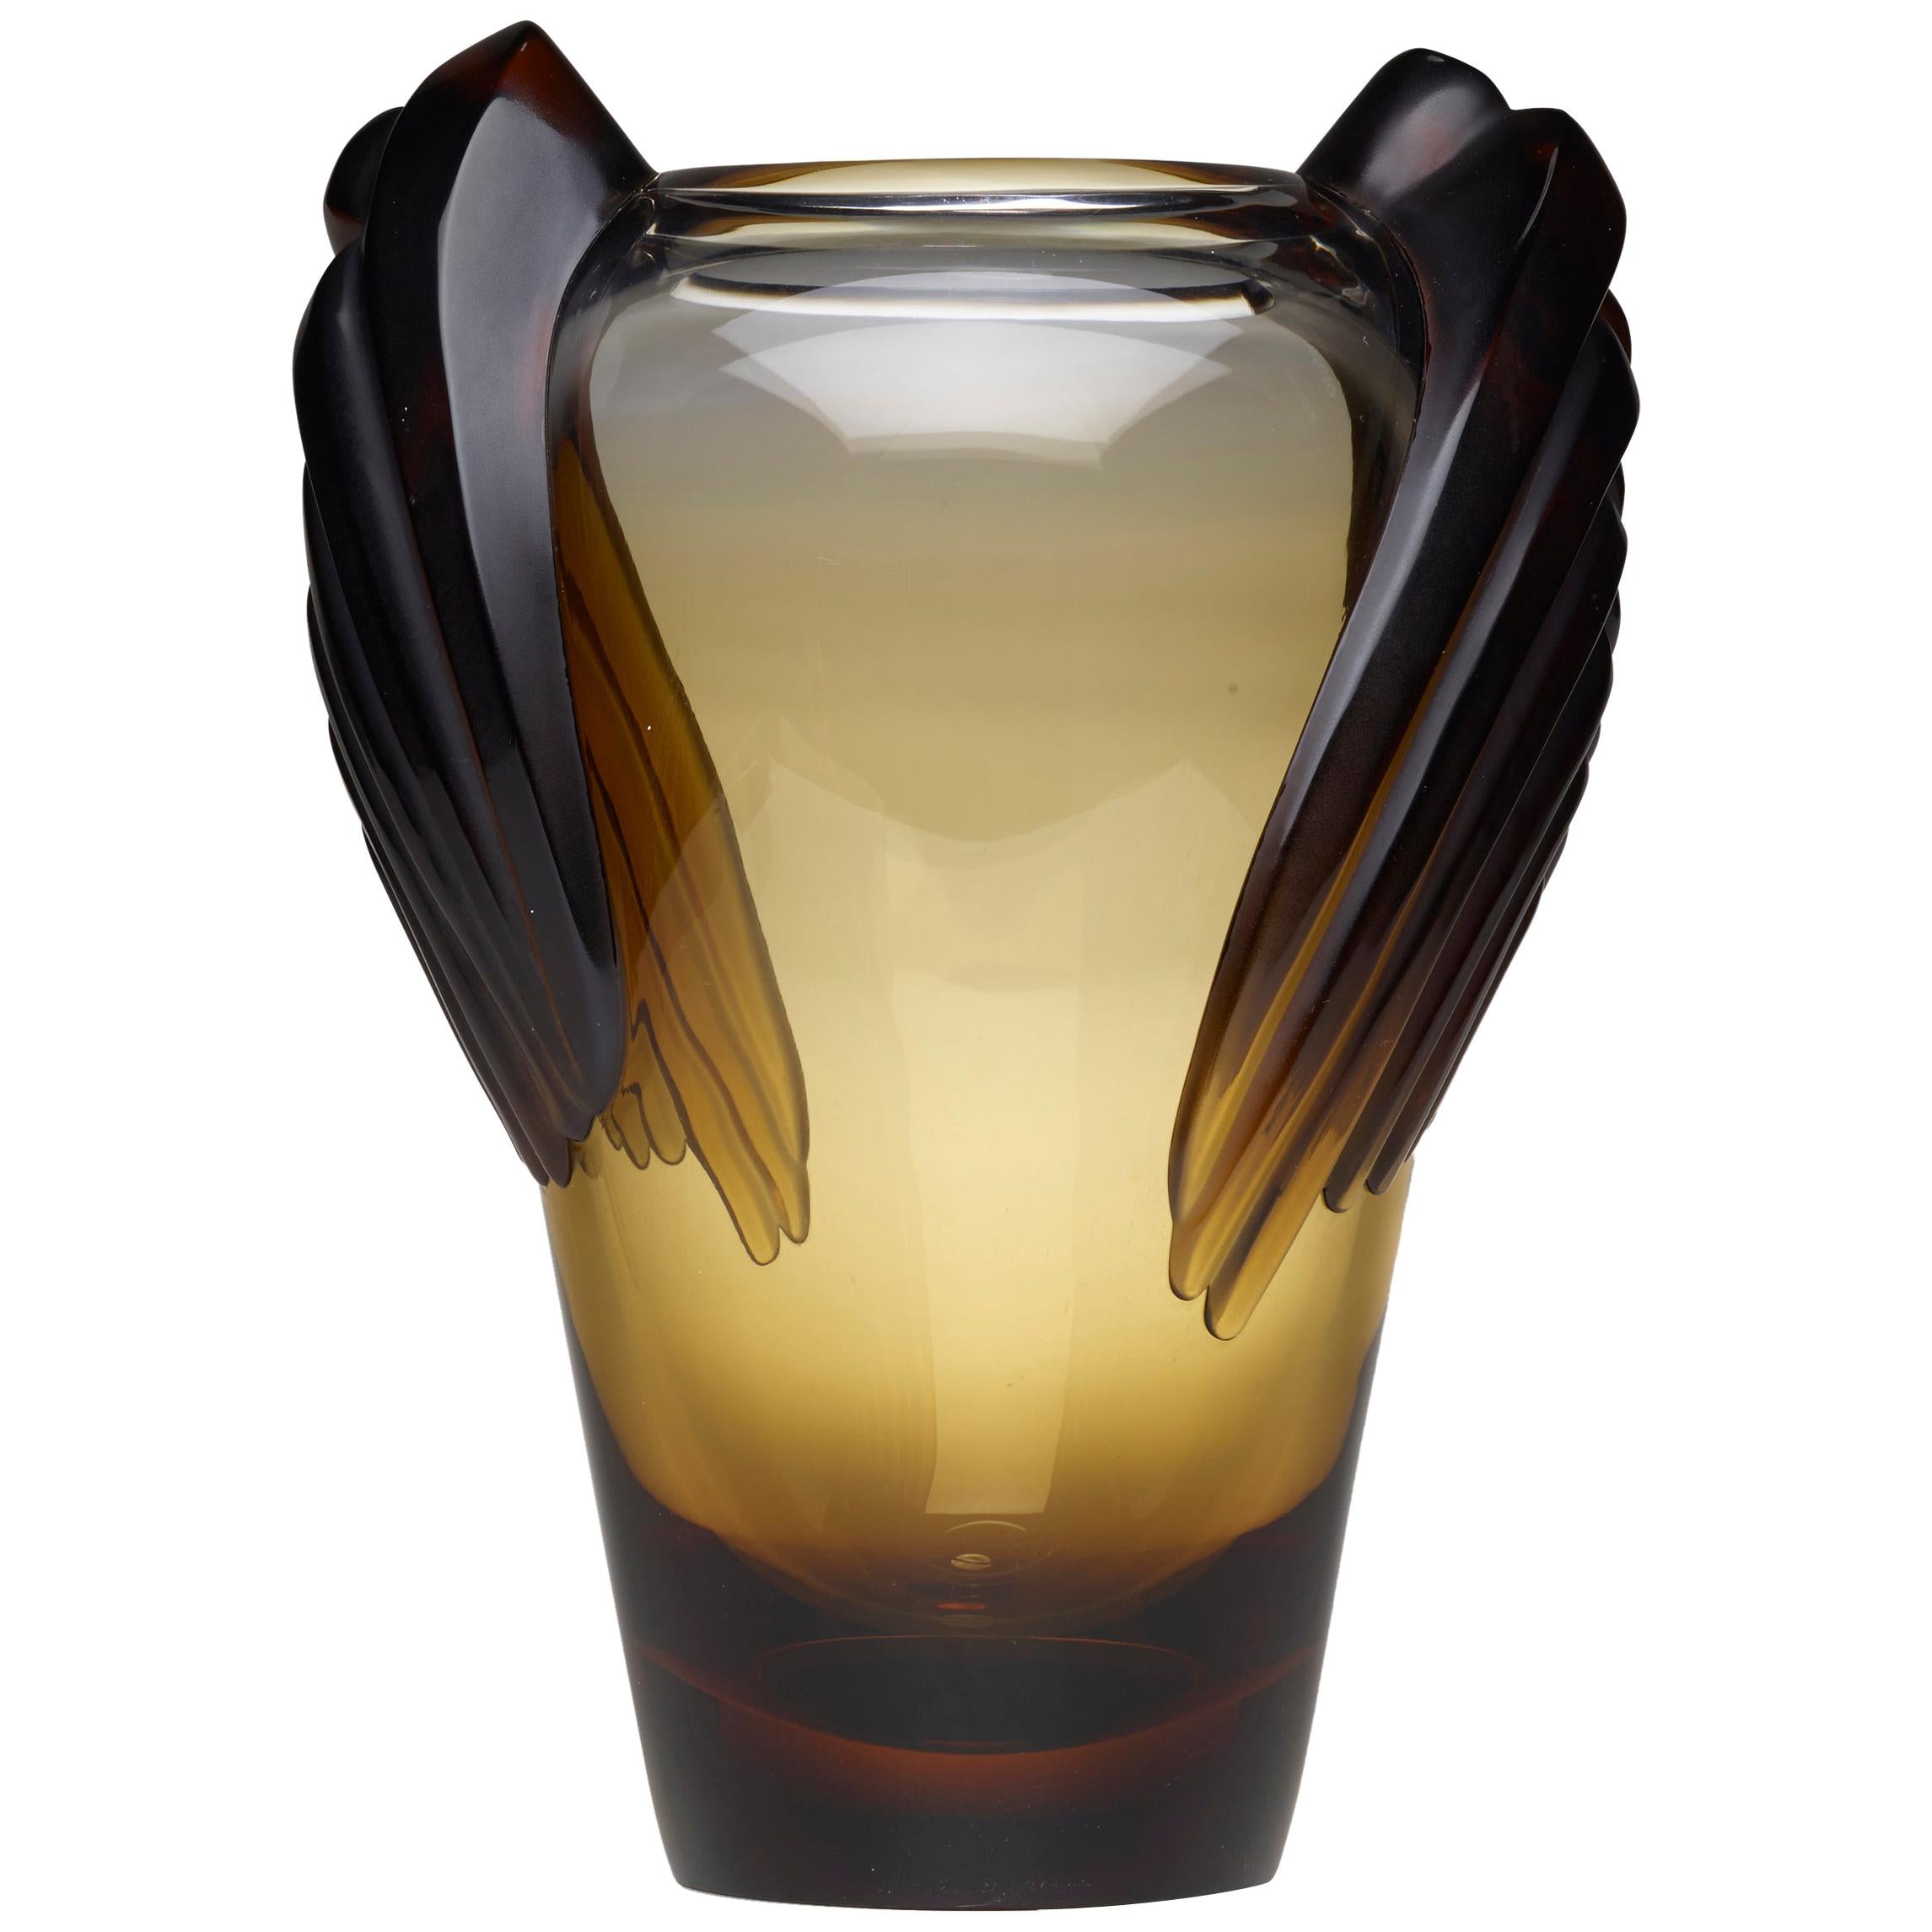 Art Deco Style Smoked Glass "Marrakech" Vase by Lalique For Sale